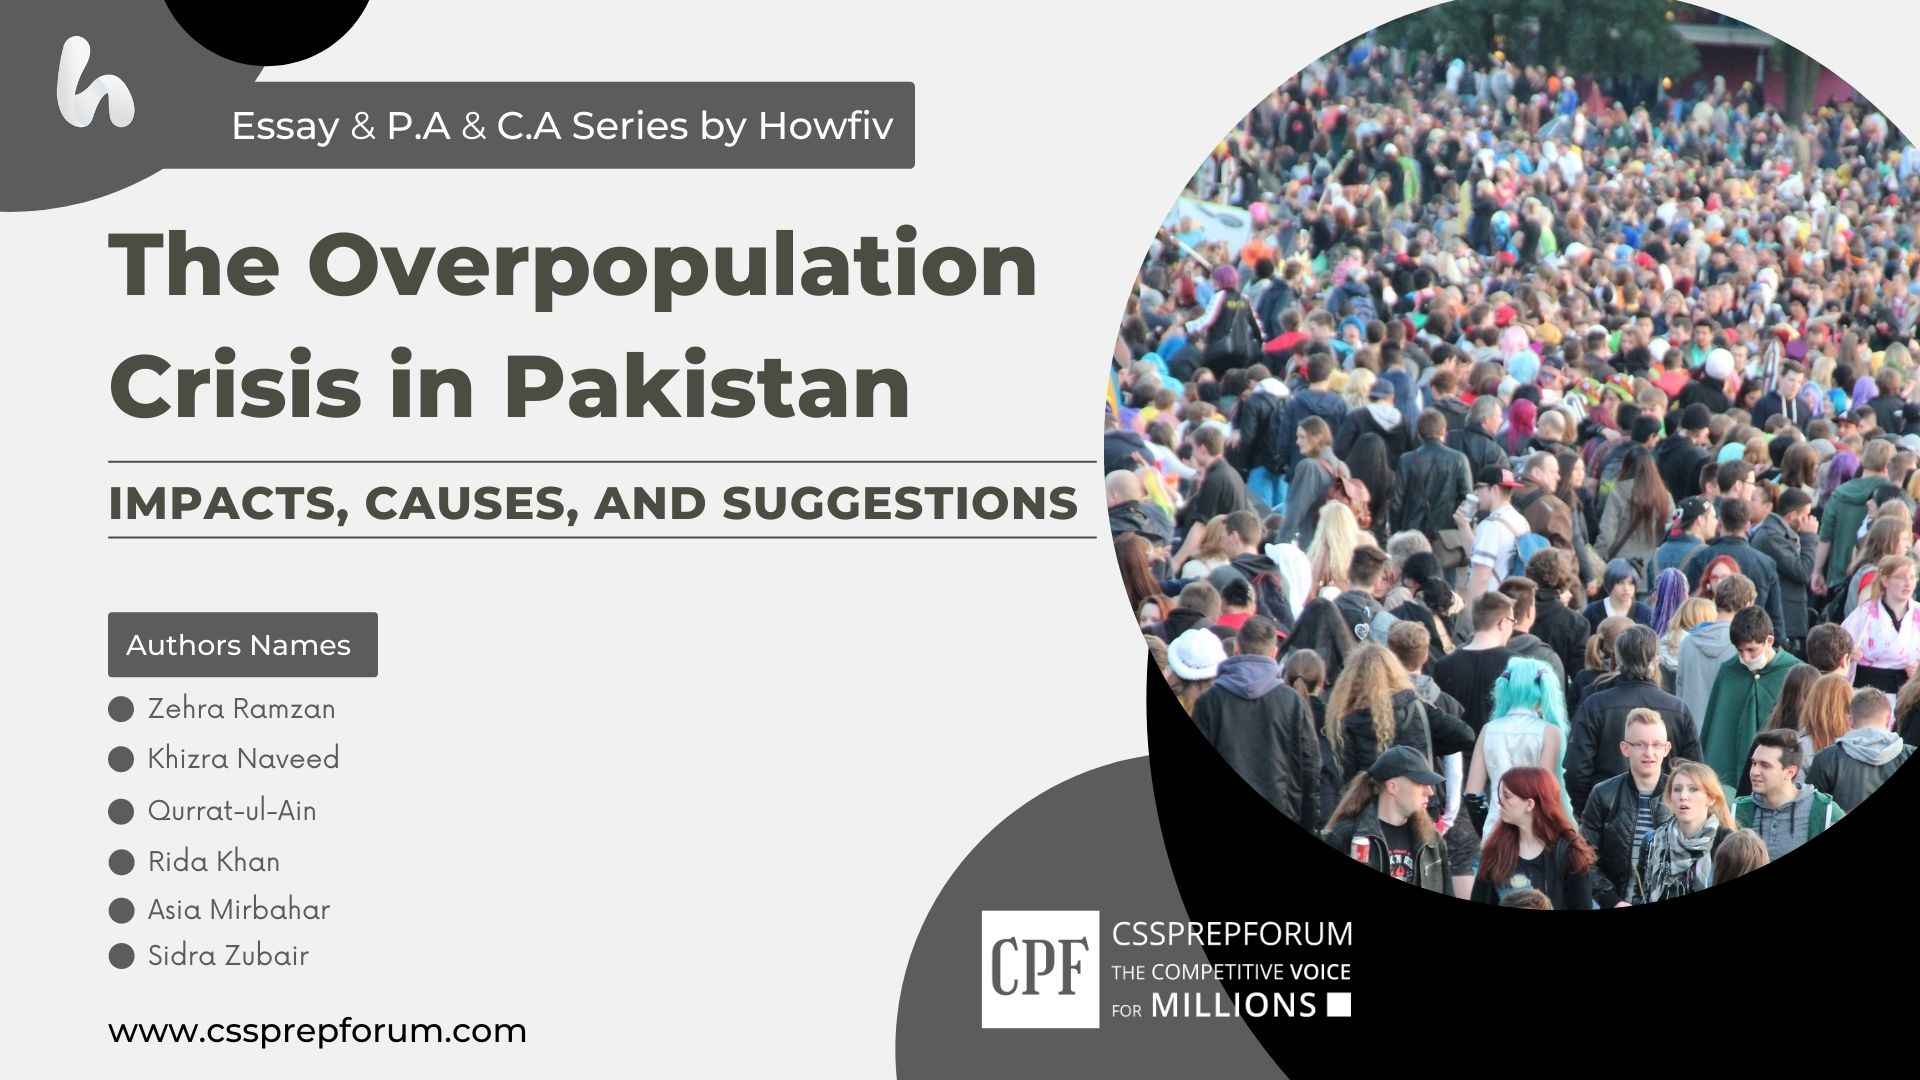 The Overpopulation Crisis in Pakistan: Impacts, Causes, and Suggestions